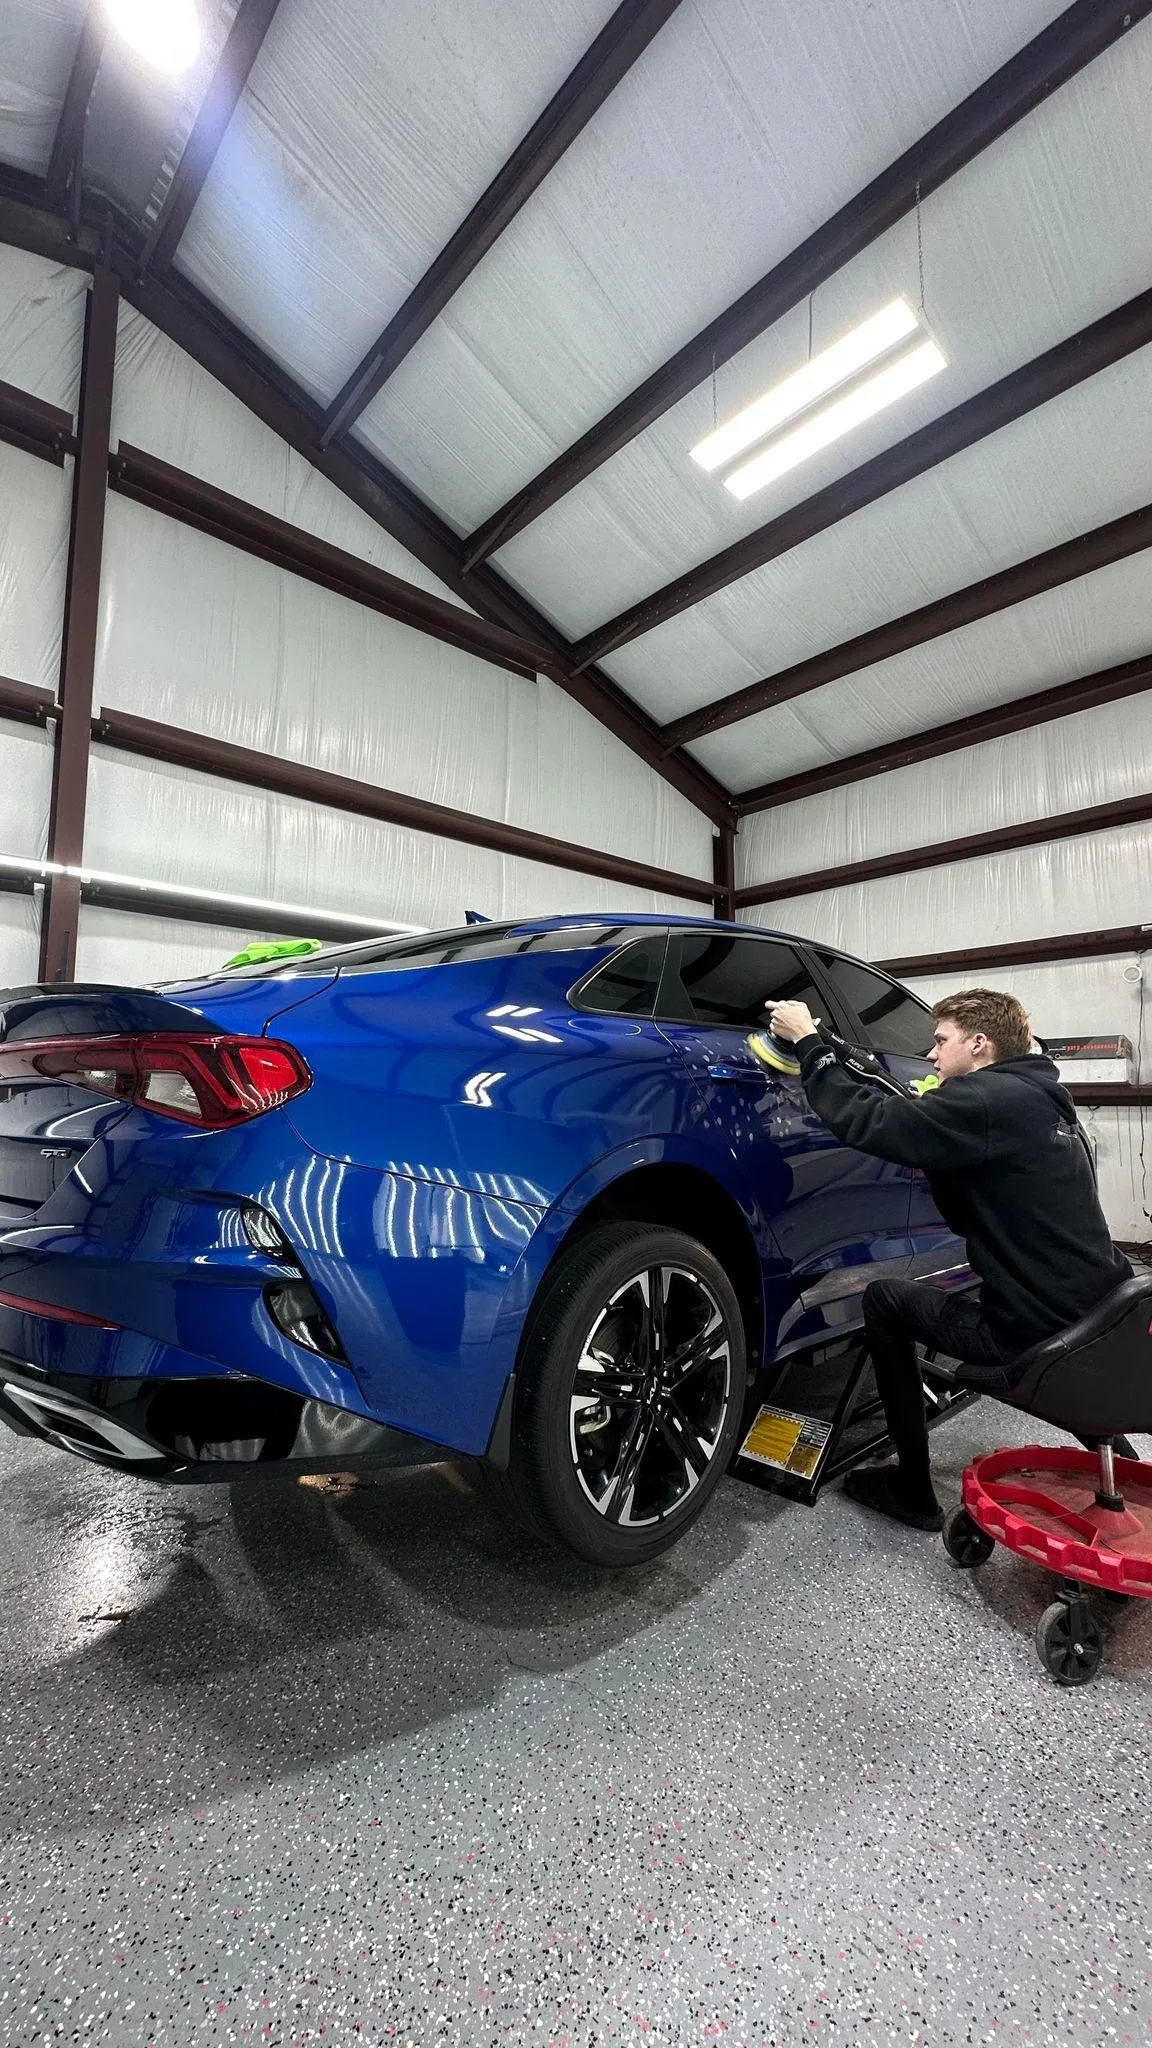 Southern Tint Pros Is Walker's Top Rated Ceramic Coating Specialists